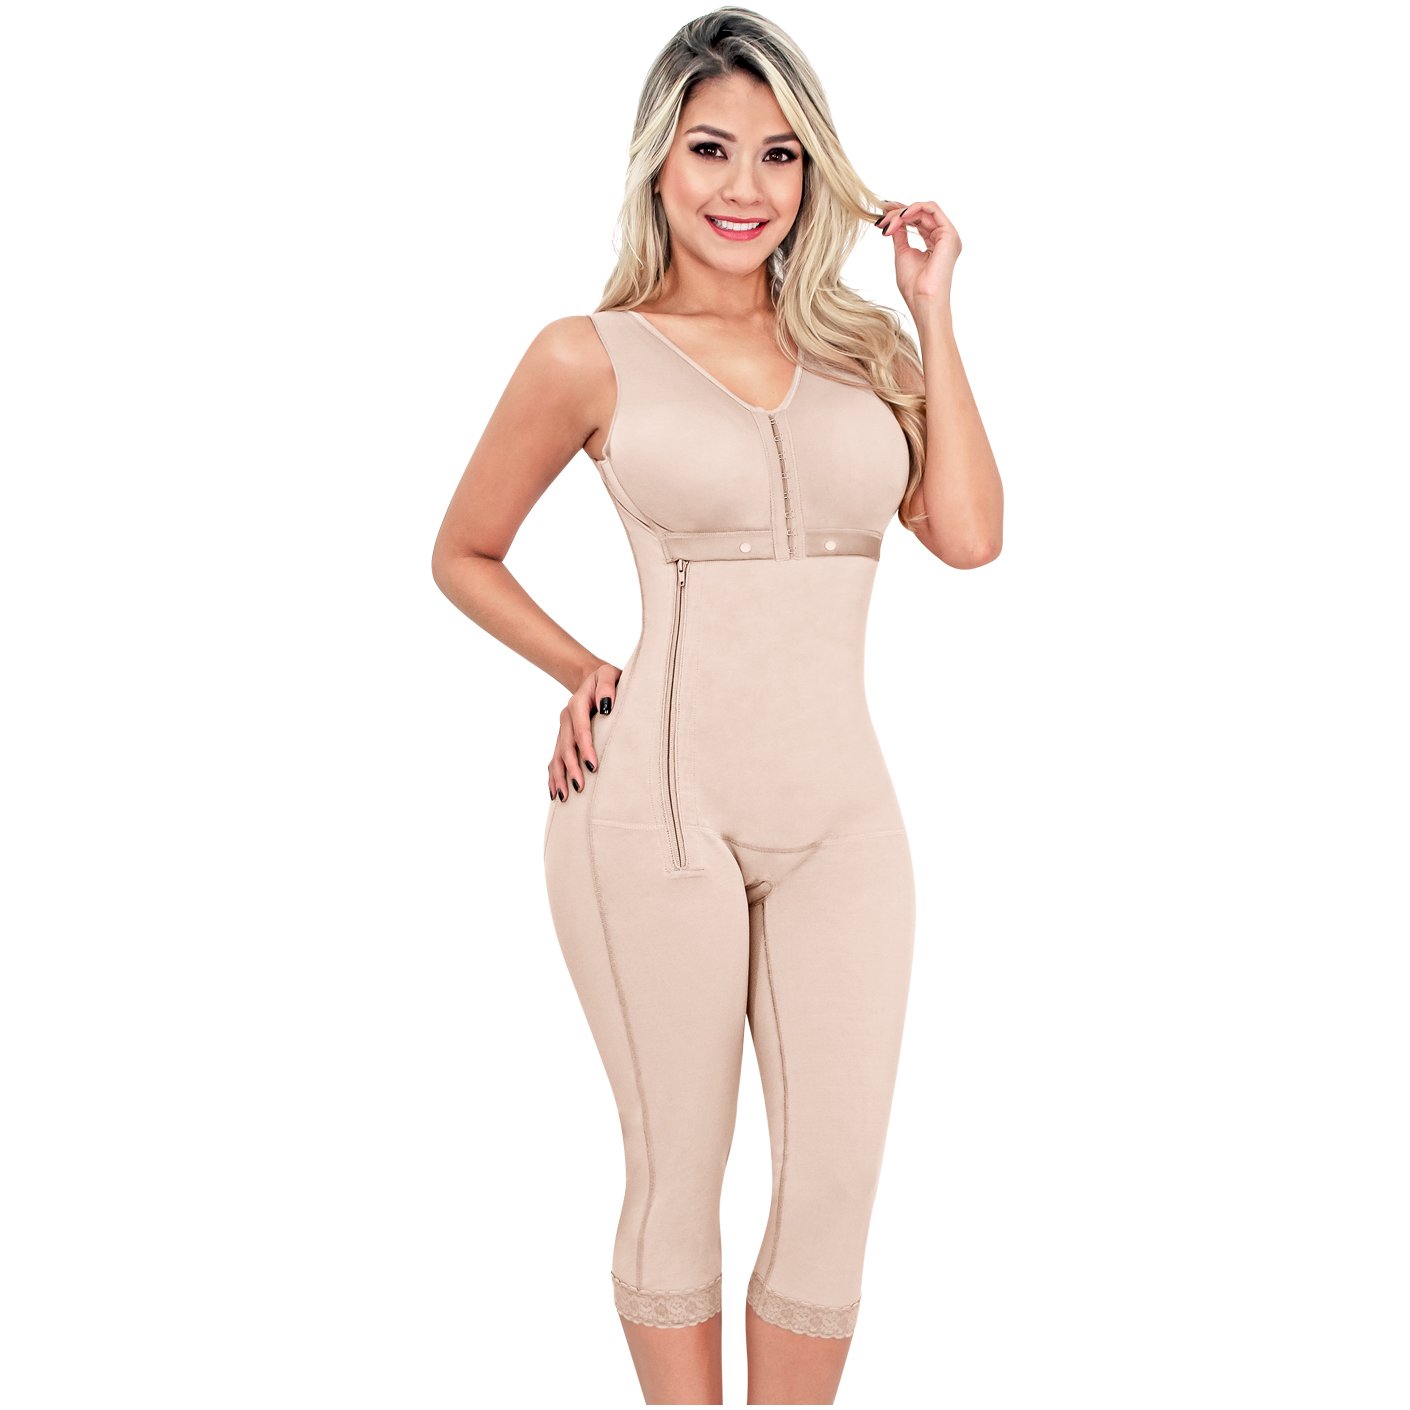 SONRYSE 010ZL Long Capri Shapewear Knee Length with Built-in bra & High Back | Post Surgery and Postpartum Use - fajacolombian